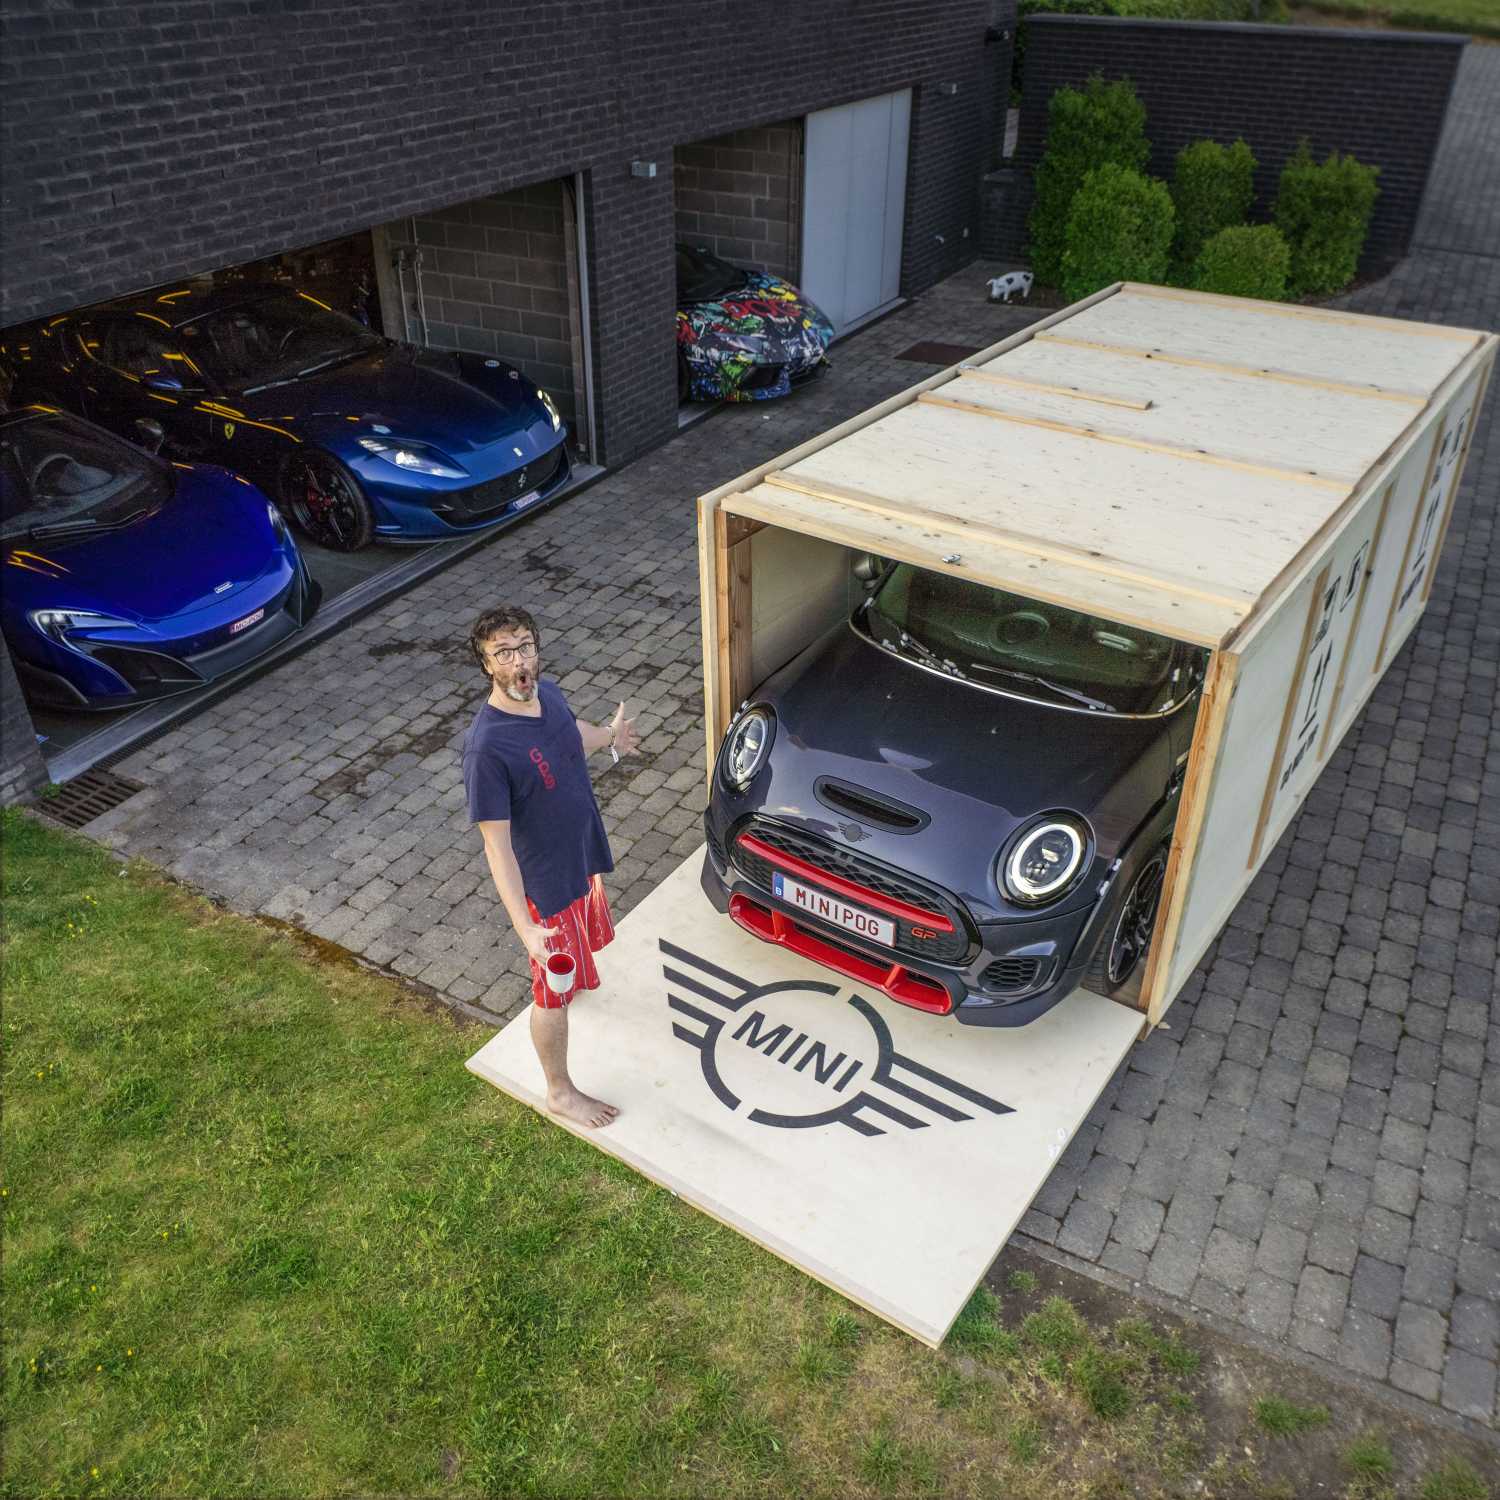 MINI Belux delivered the new MINI John Cooper Works GP at POG’s home in a spectacular way (05/2020)